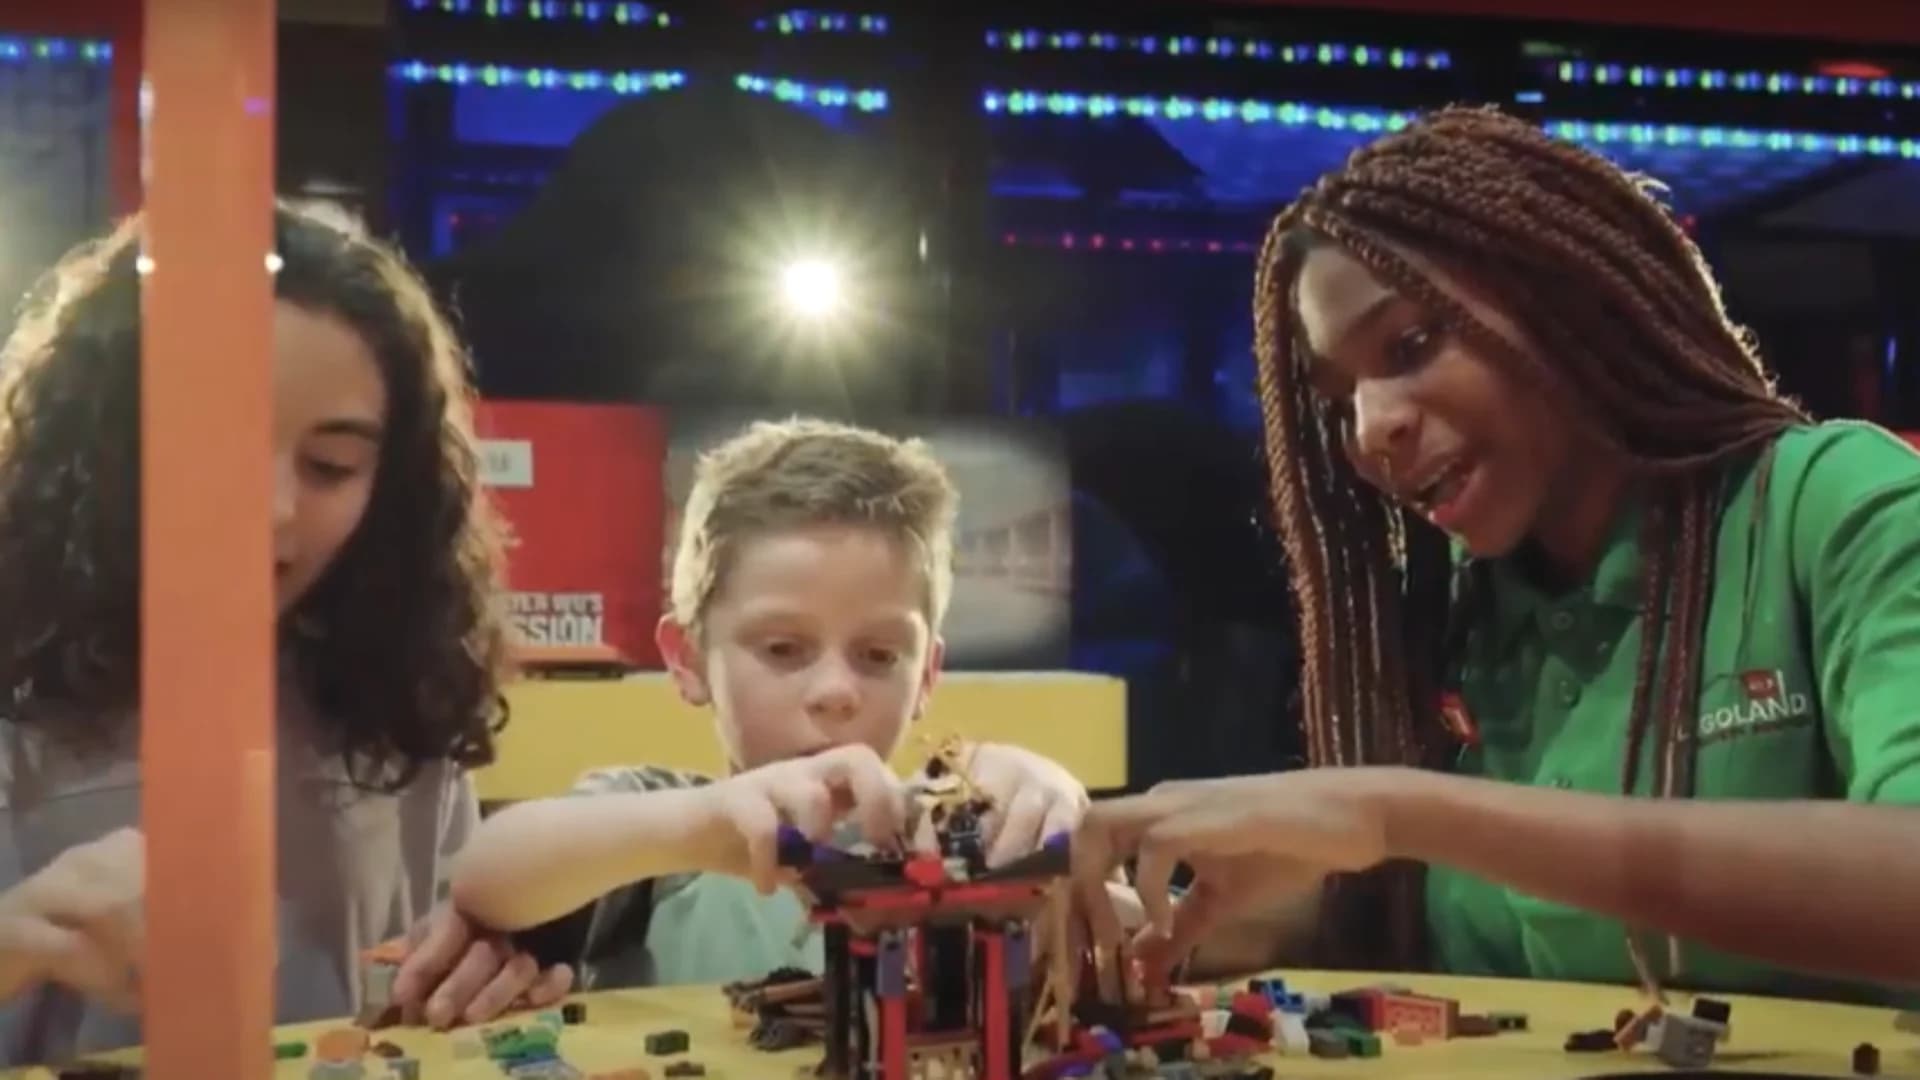 How would you like to get paid to play with LEGO bricks? LEGOLAND is hiring for the dream job